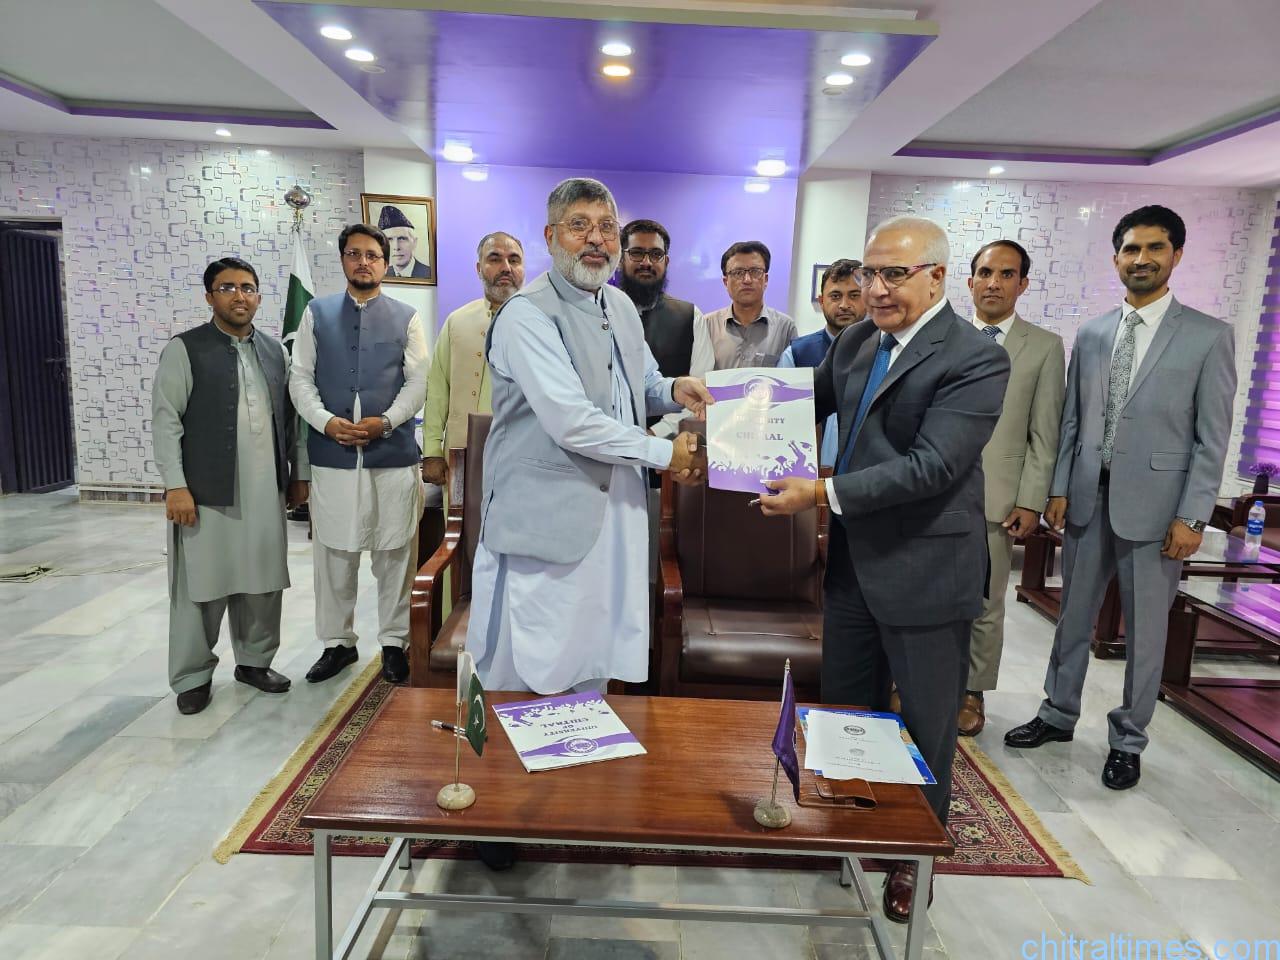 chitraltimes university of chitral mou with uo swabi